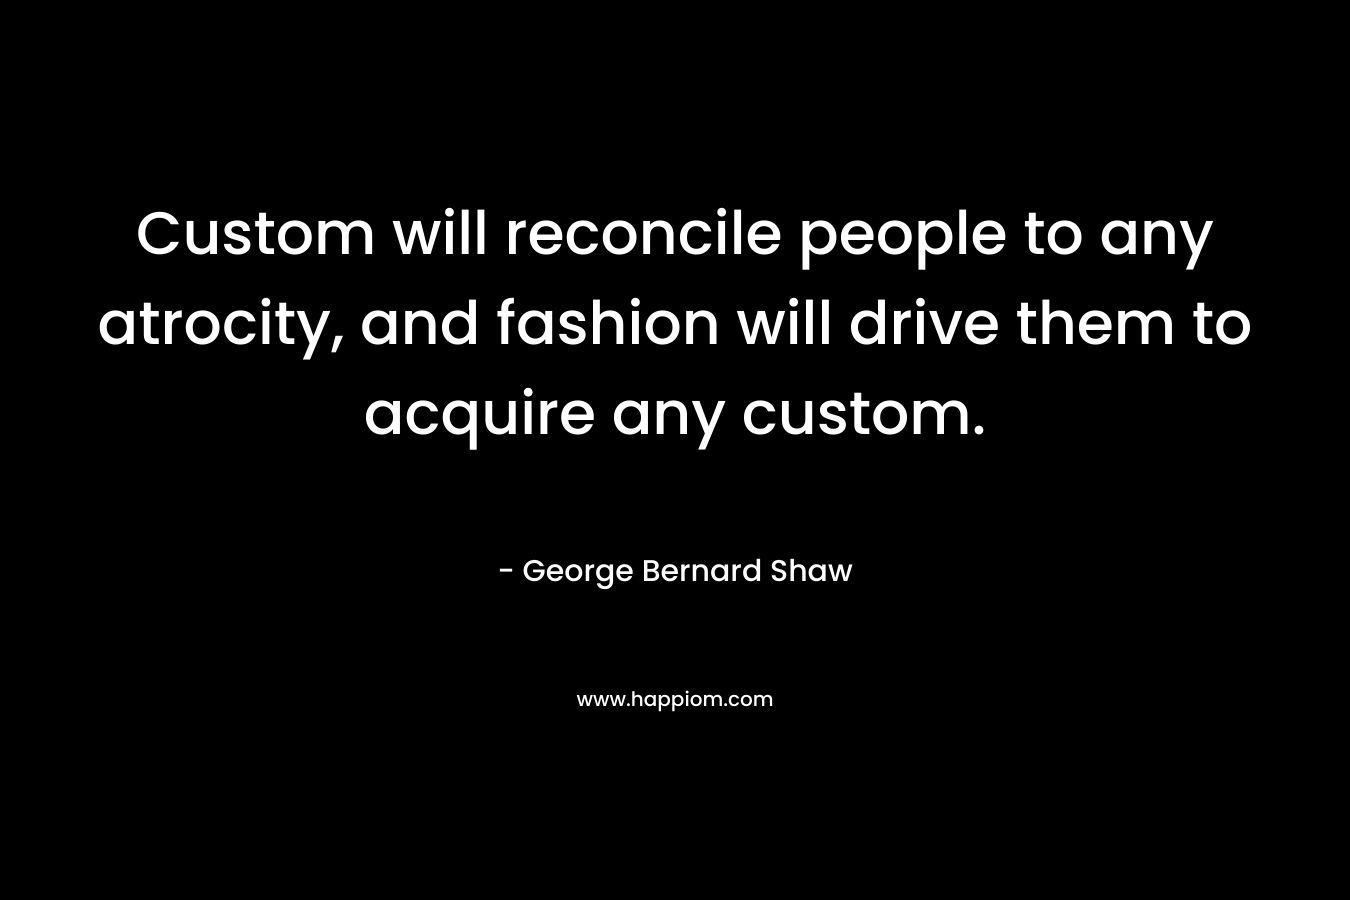 Custom will reconcile people to any atrocity, and fashion will drive them to acquire any custom. – George Bernard Shaw